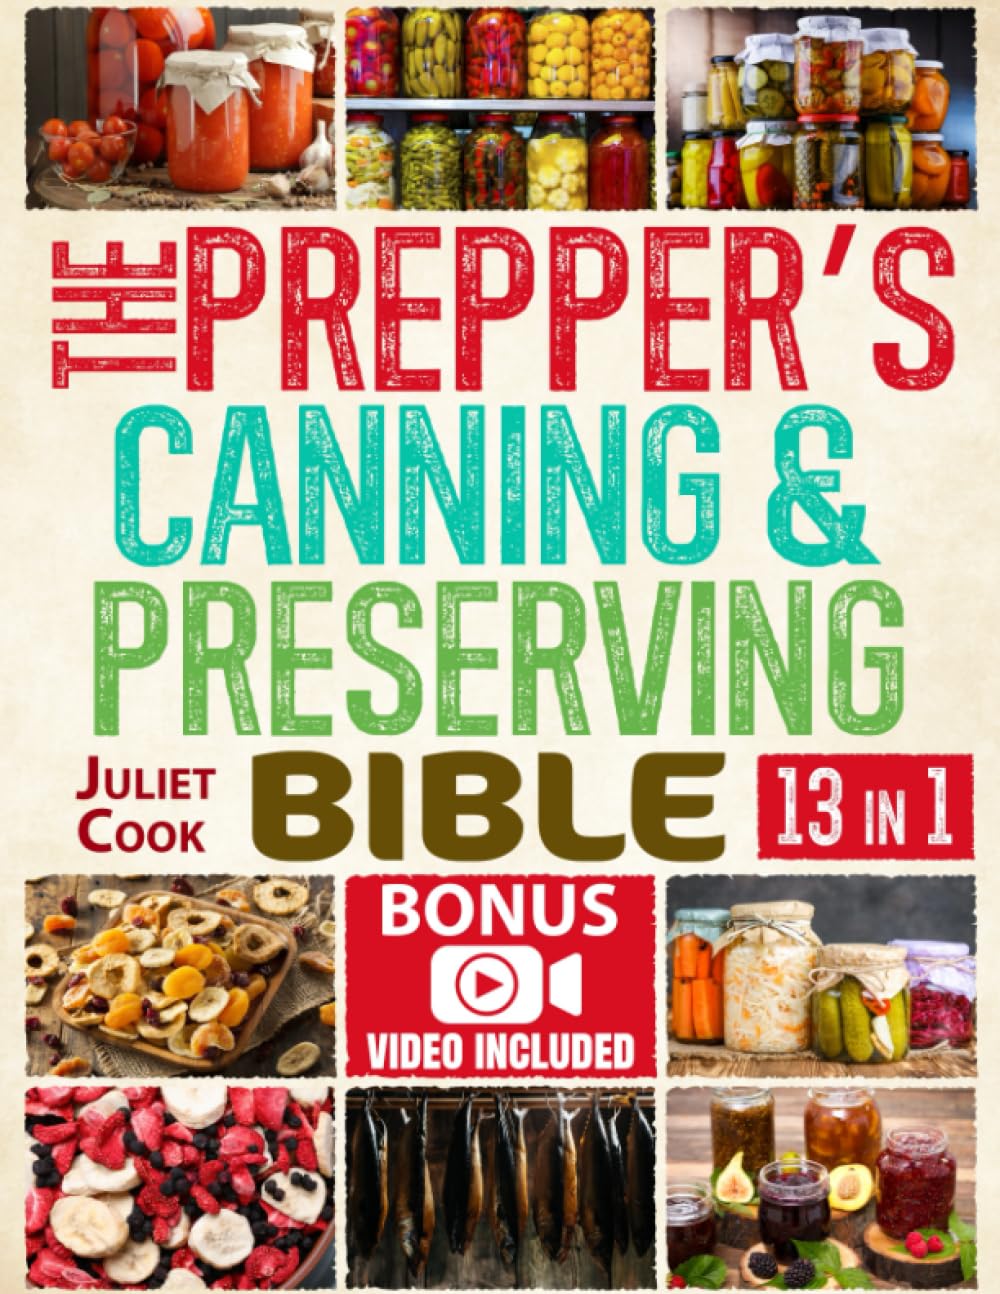 The Prepper’s Canning & Preserving Bible: The Complete Guide to Water Bath & Pressure Canning, Fermenting, Pickling, Dehydrating, Freeze Drying & Smoking. Fill Your Pantry Now for All Daily Needs!